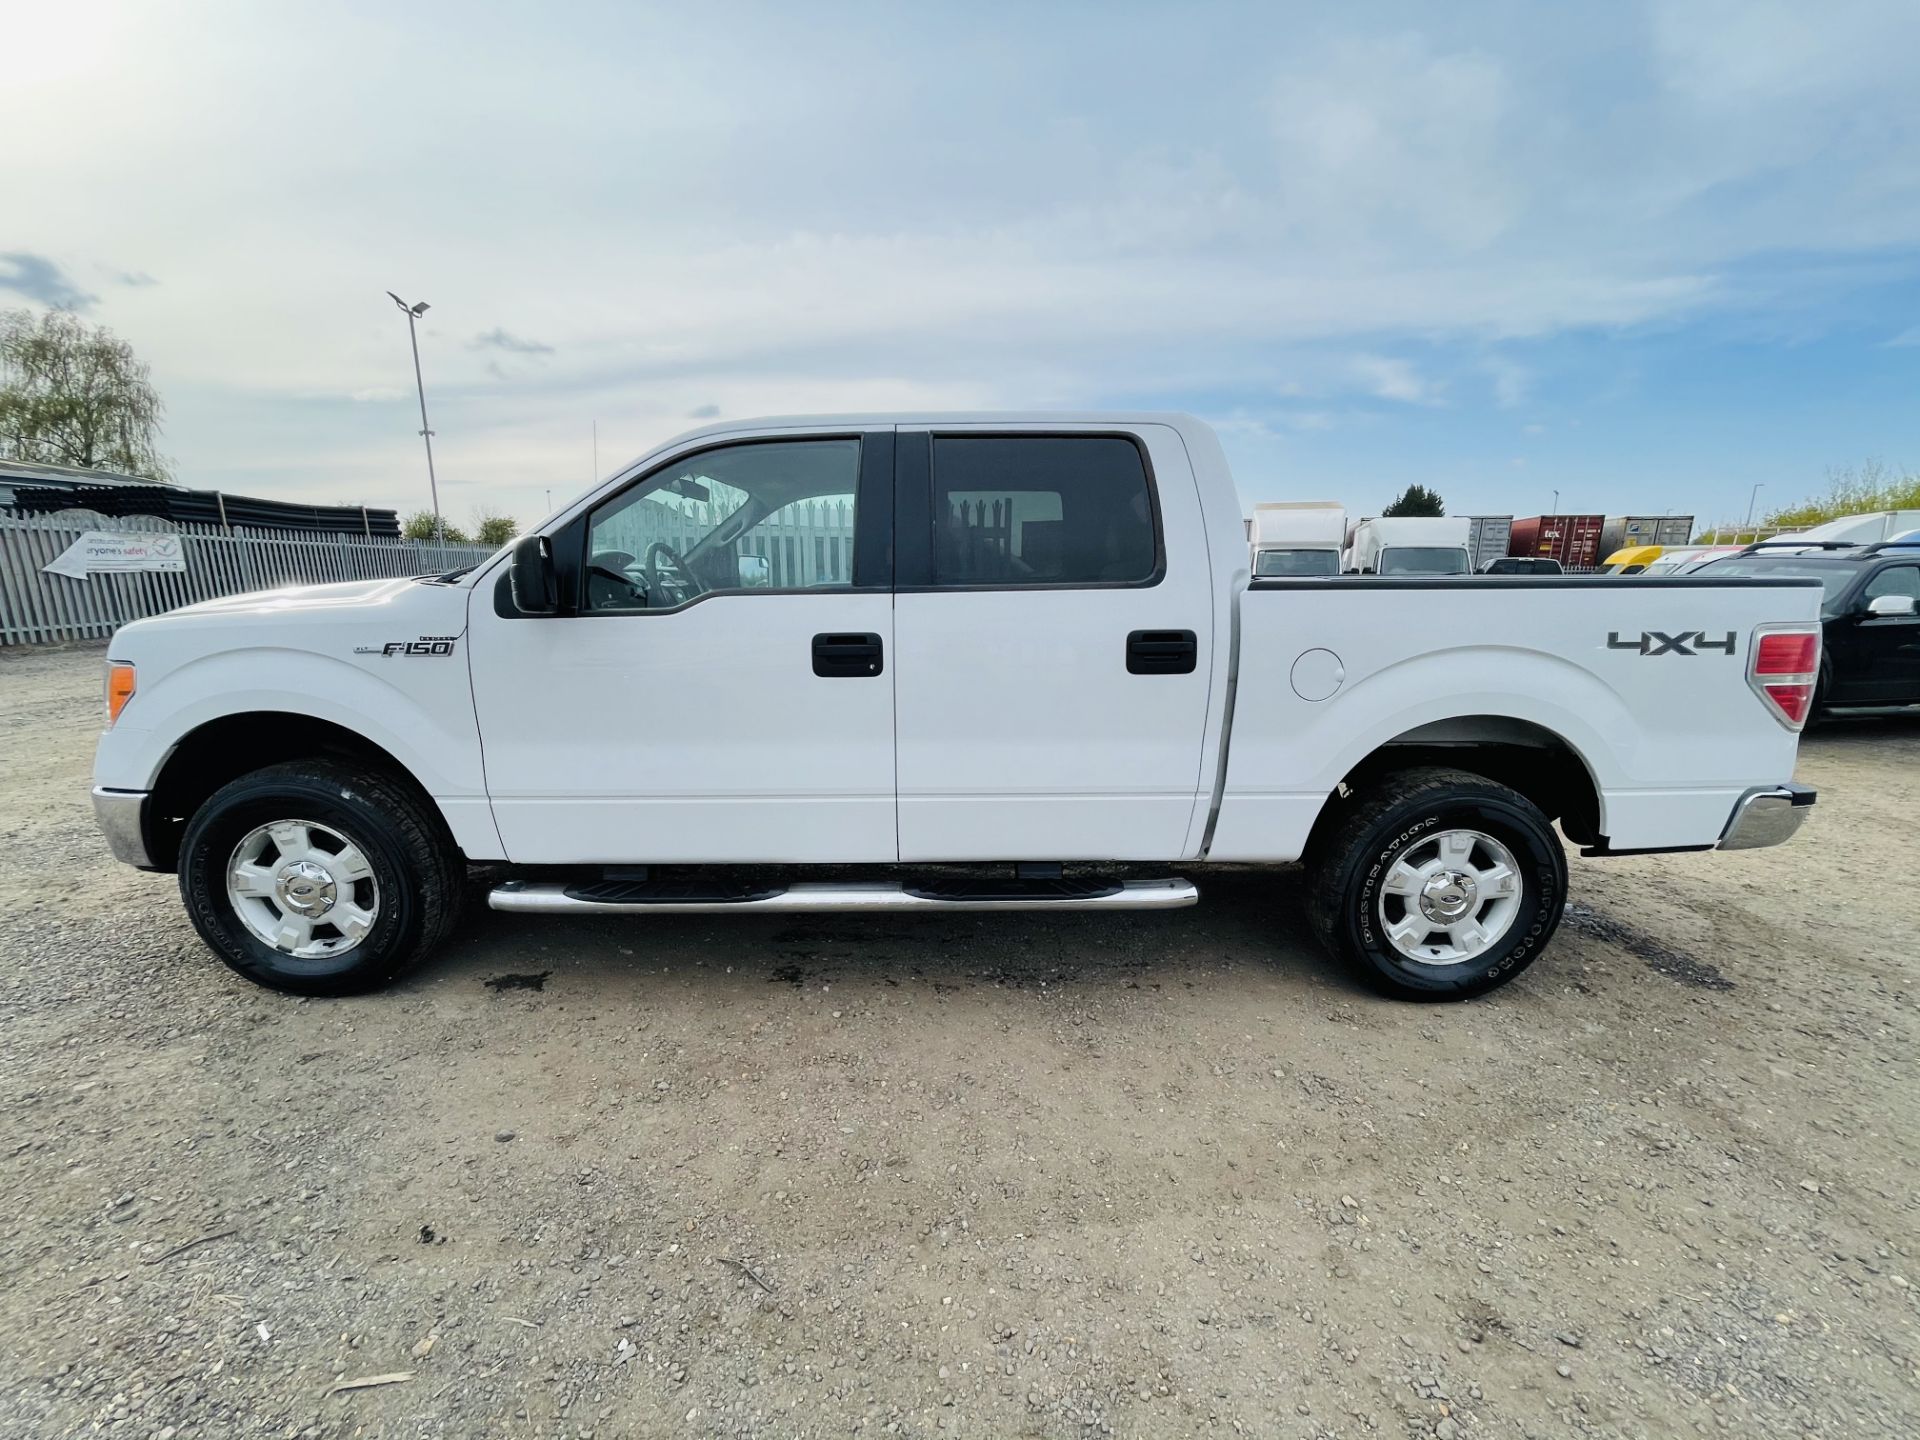 Ford F-150 XLT 4.6L V8 Super-crew 4WD 2010 ' 2010 Year' 6 Seats - Air con - NO VAT SAVE 20% - Image 6 of 24